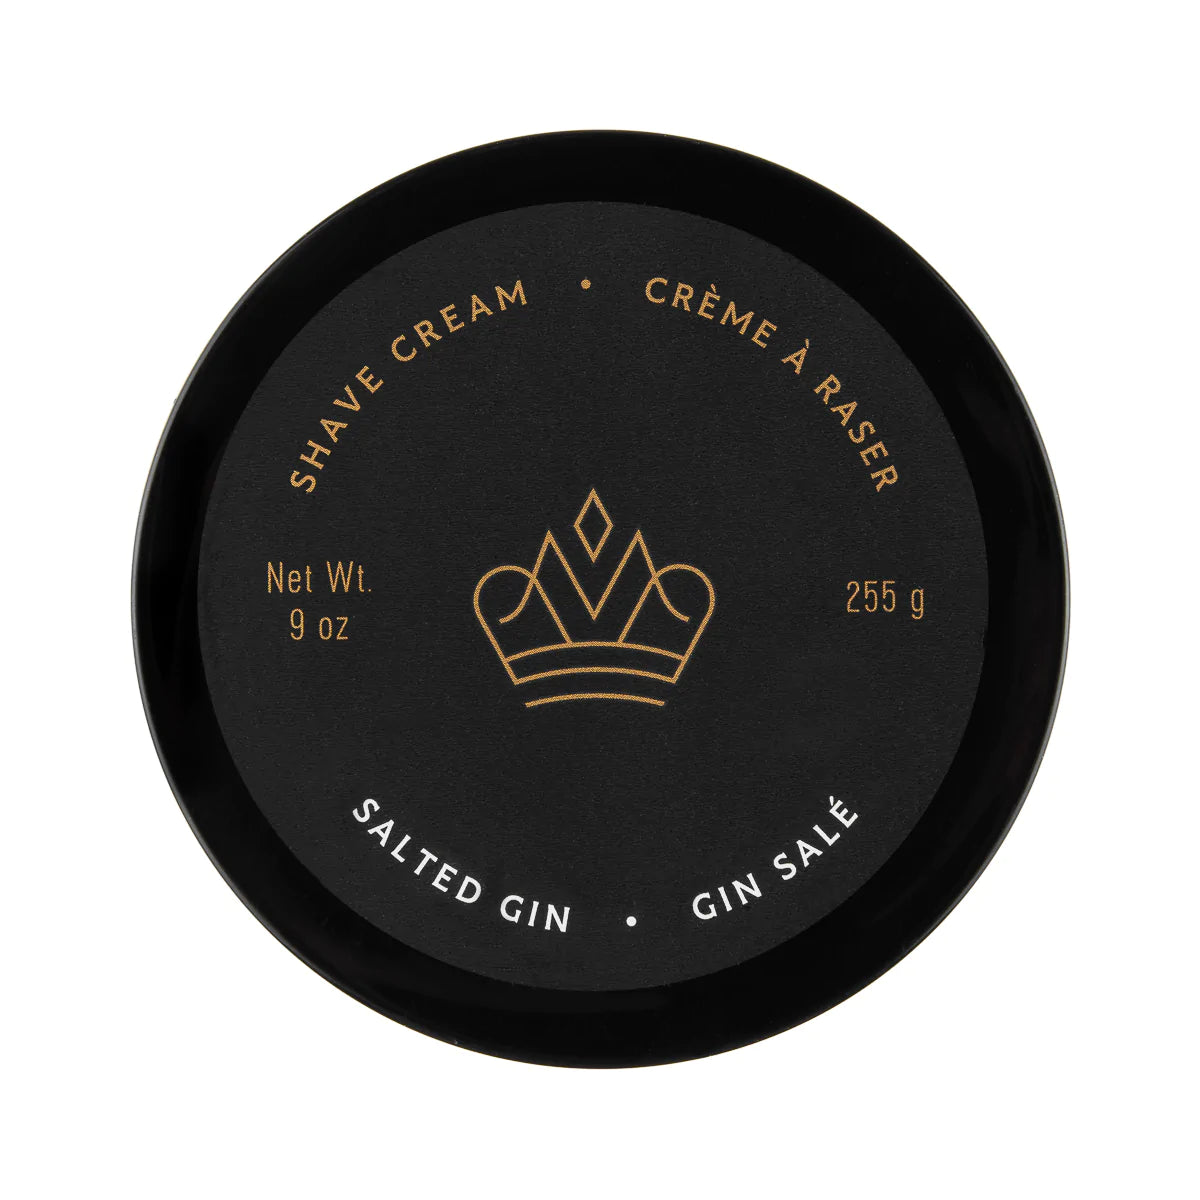 Salted Gin Shave Cream